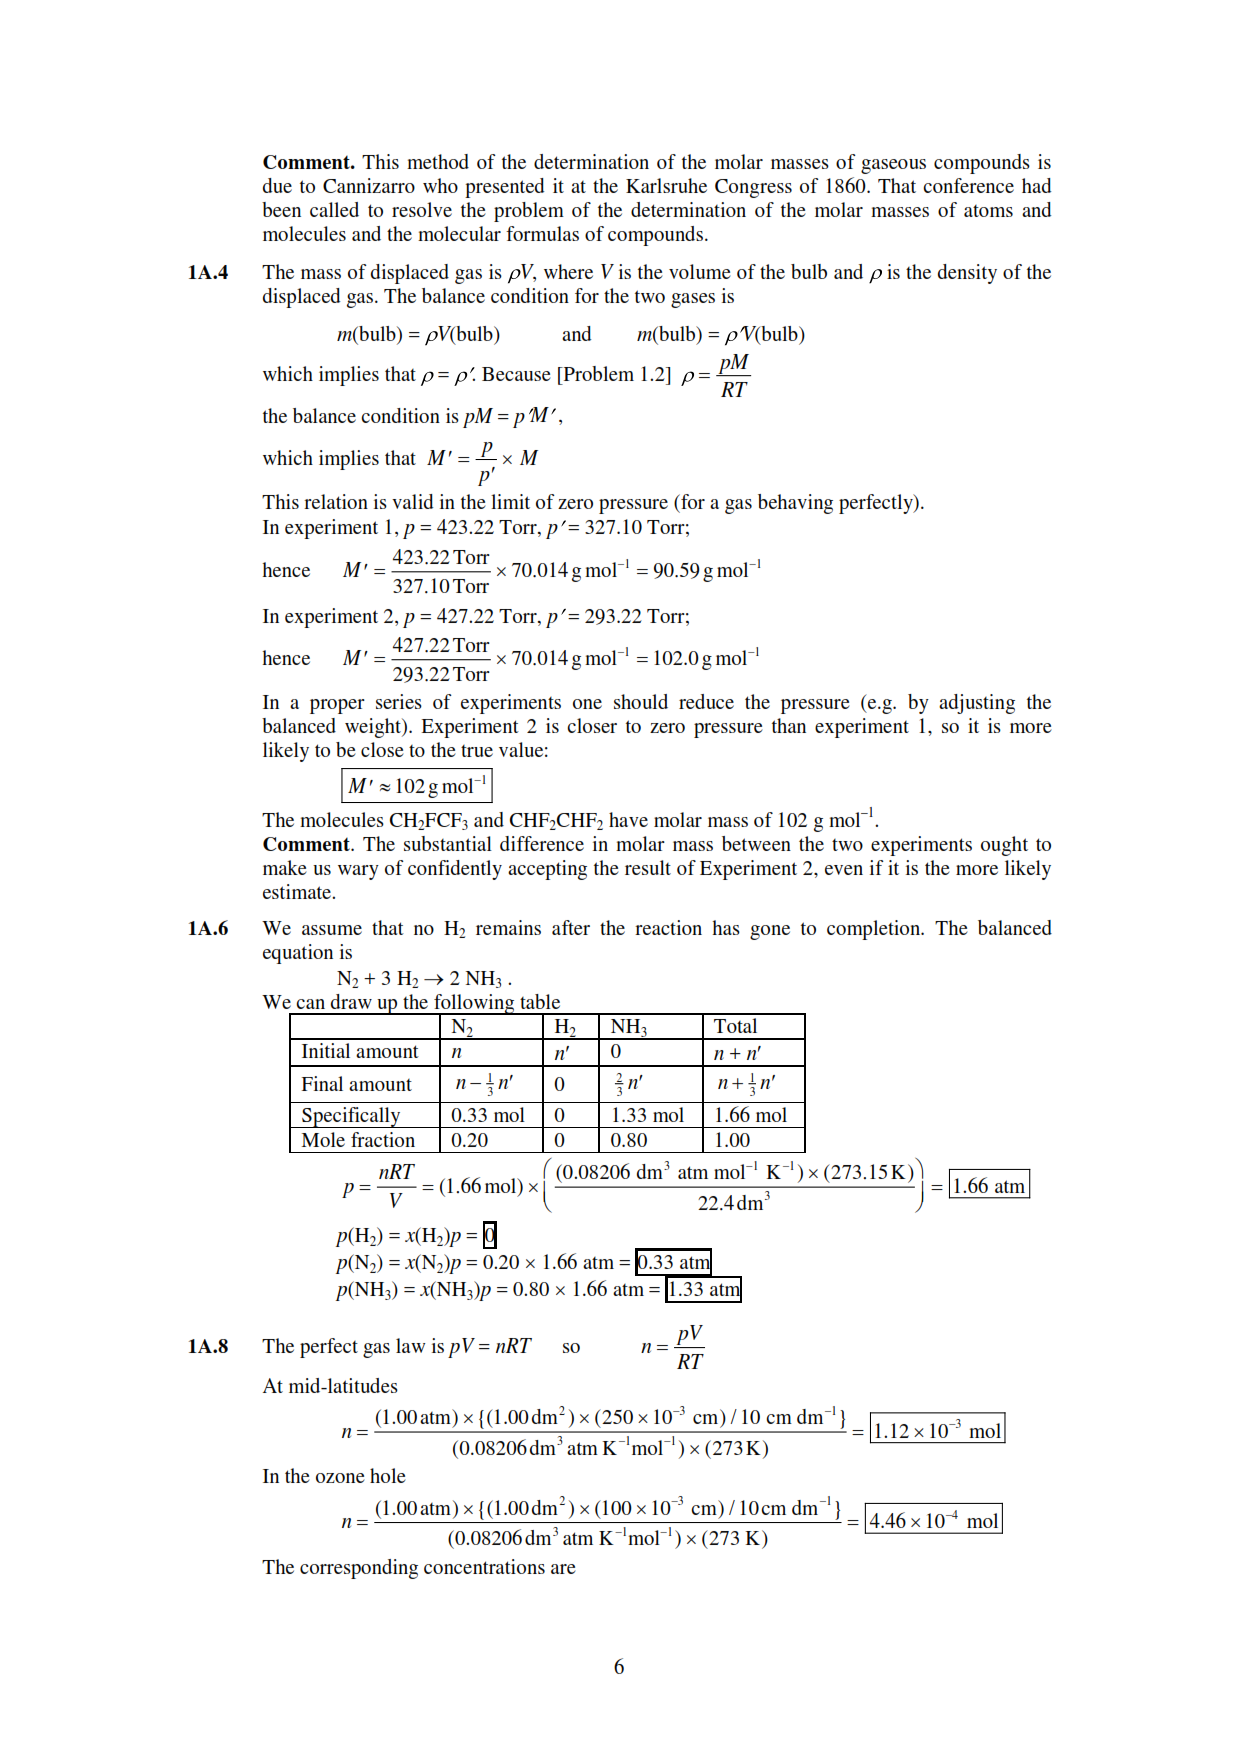 Student Solutions Manual to Atkins’ Physical Chemistry 10th